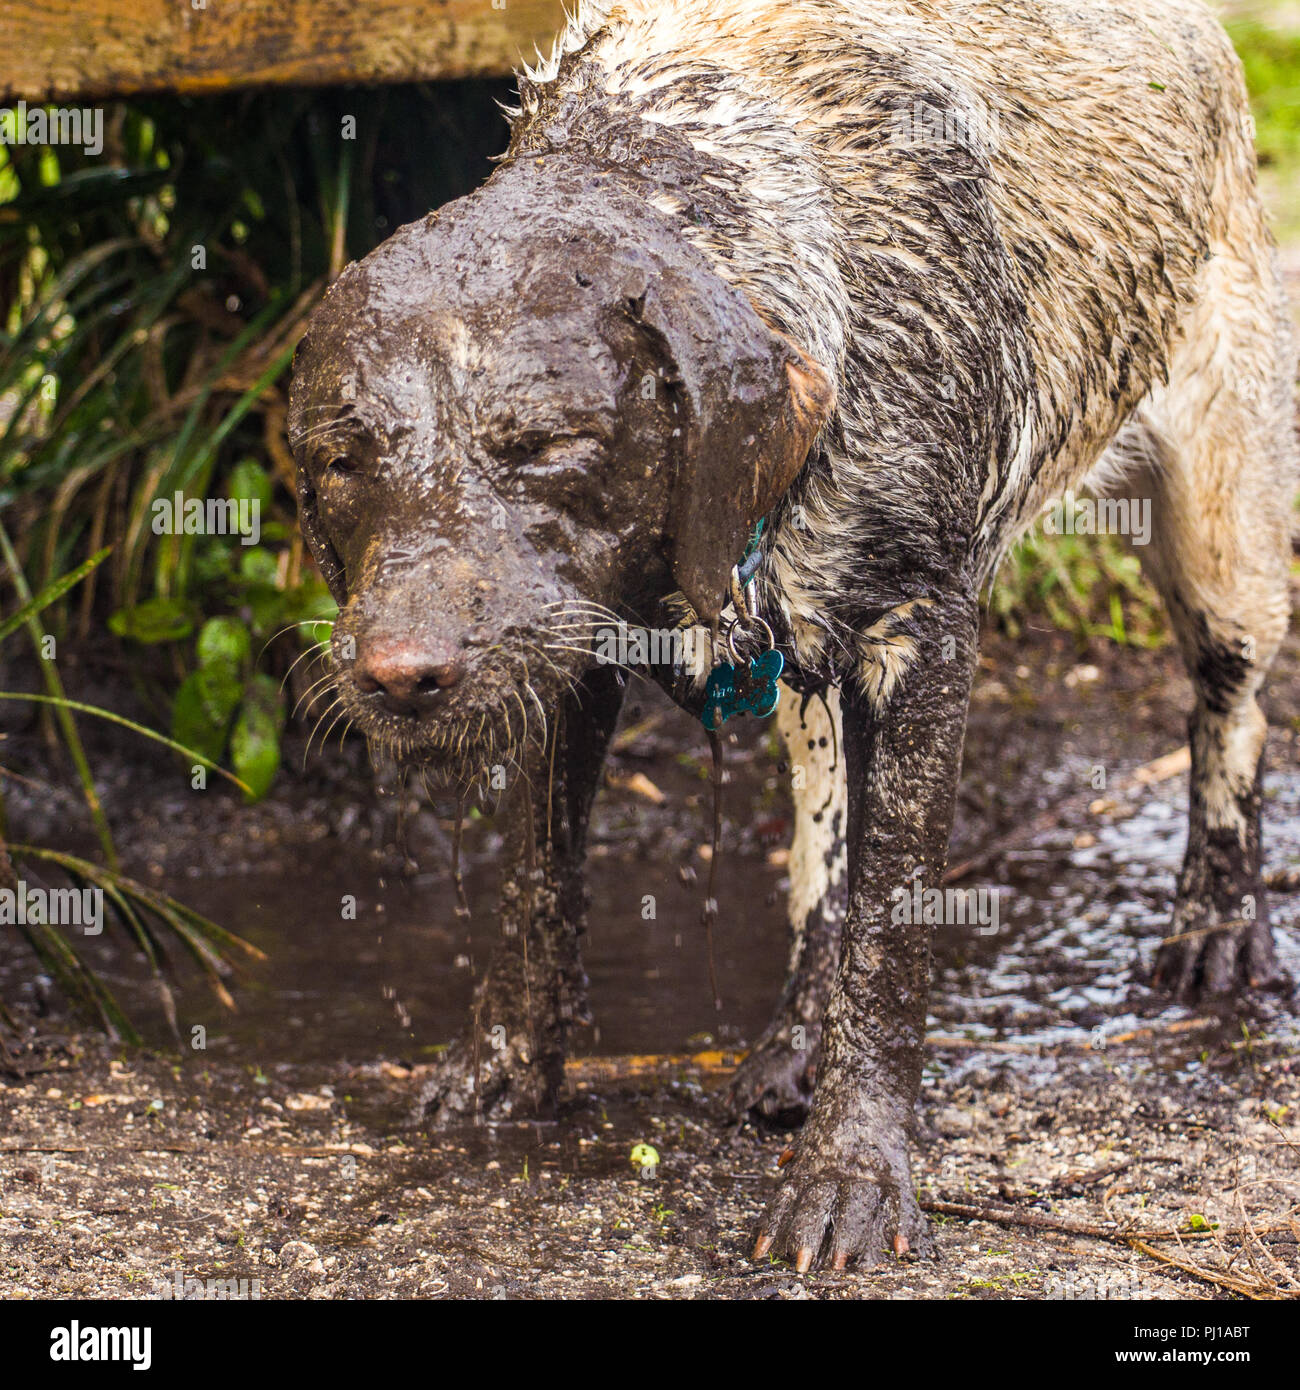 dog-covered-in-mud-united-states-stock-photo-alamy